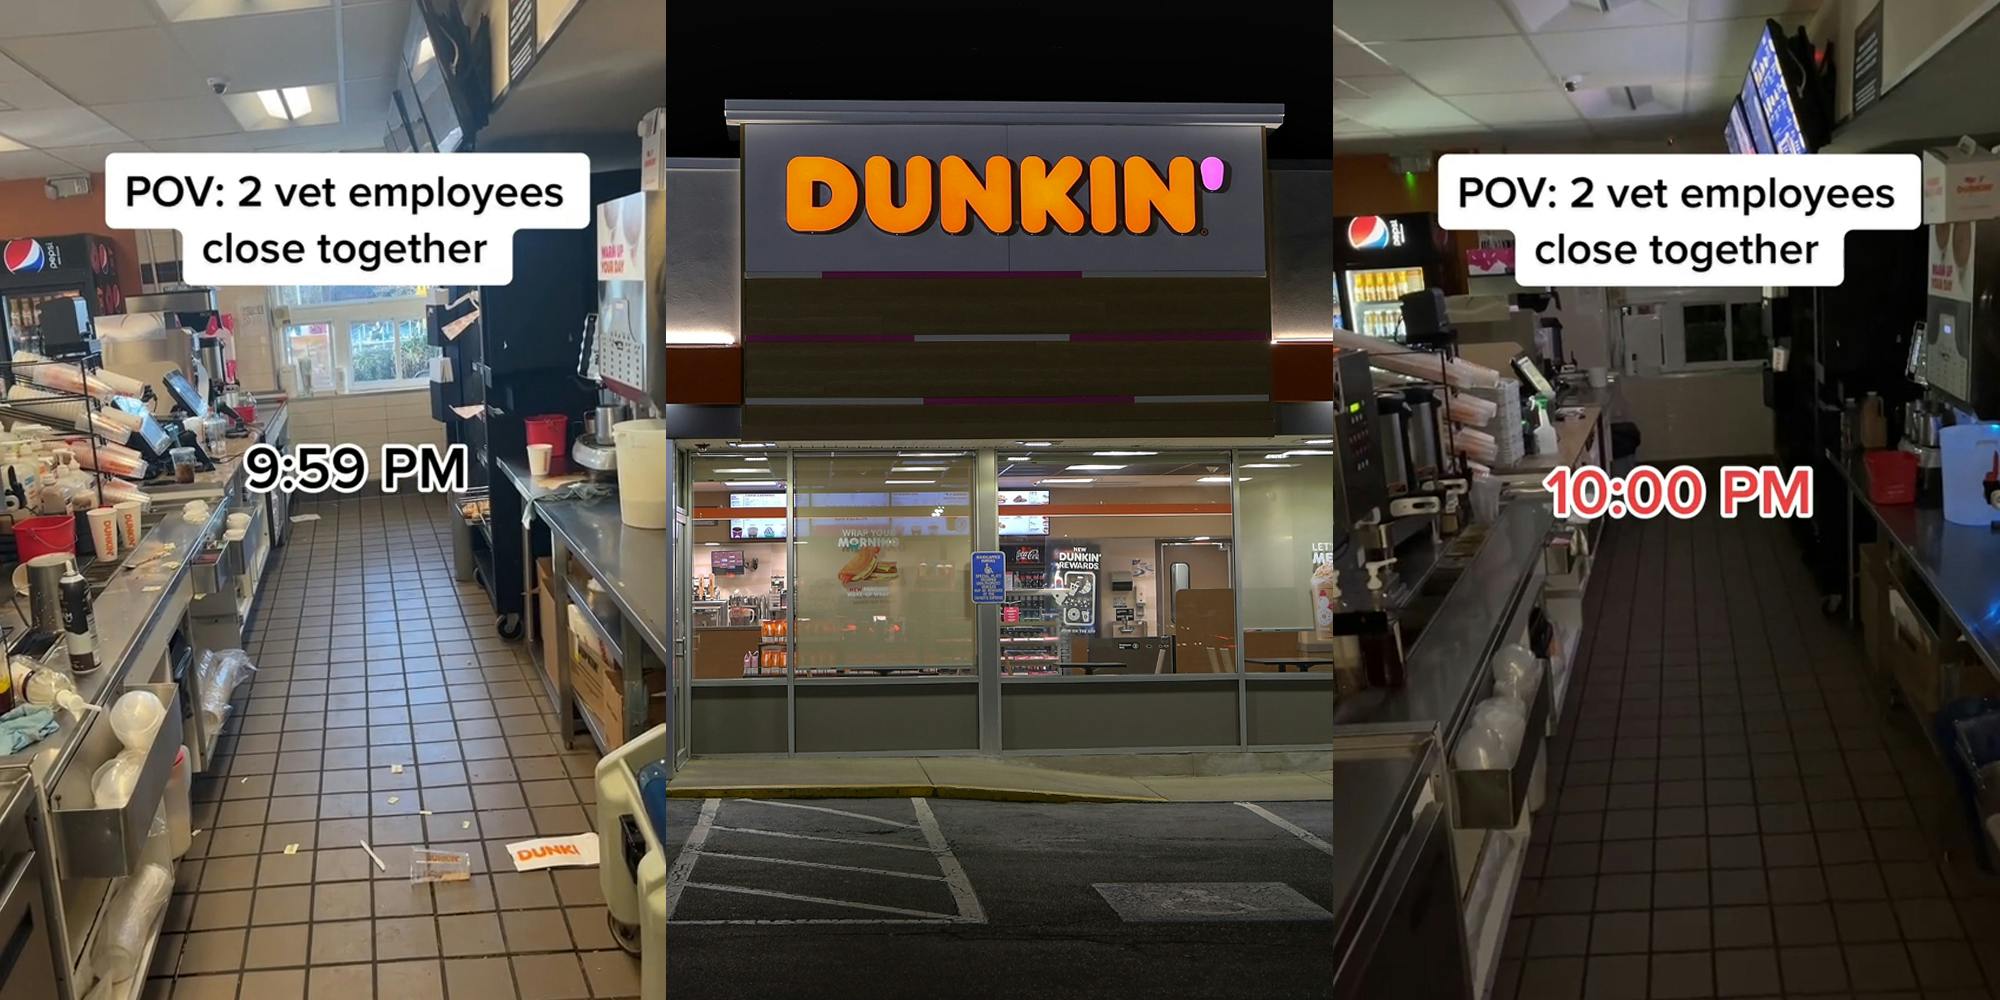 Dunkin' interior with wrappers on floor with caption "POV: 2 vet employees close together" "9:59PM" (l) Dunkin' building with sign at night (c) Dunkin' interior with caption "POV: 2 vet employees close together" "10:00PM" (r)